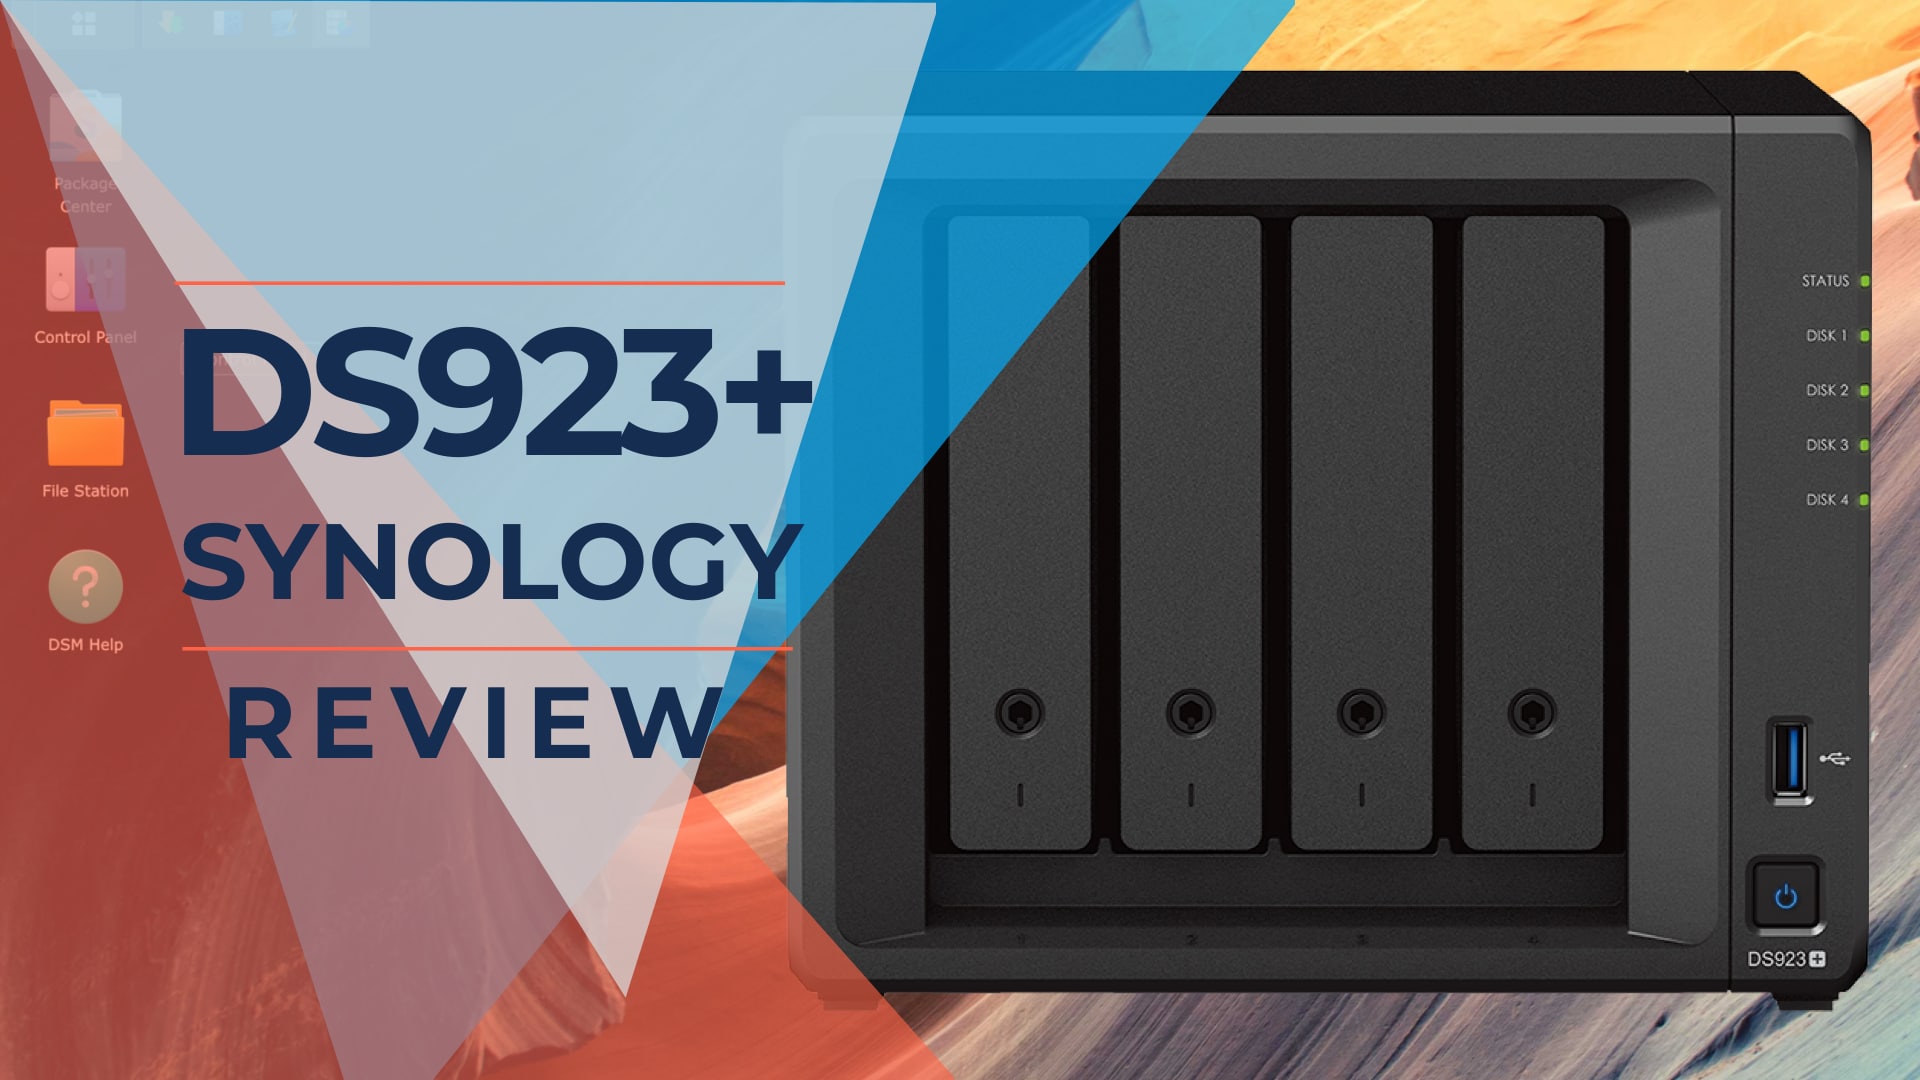 Synology DS923+ Review Banner